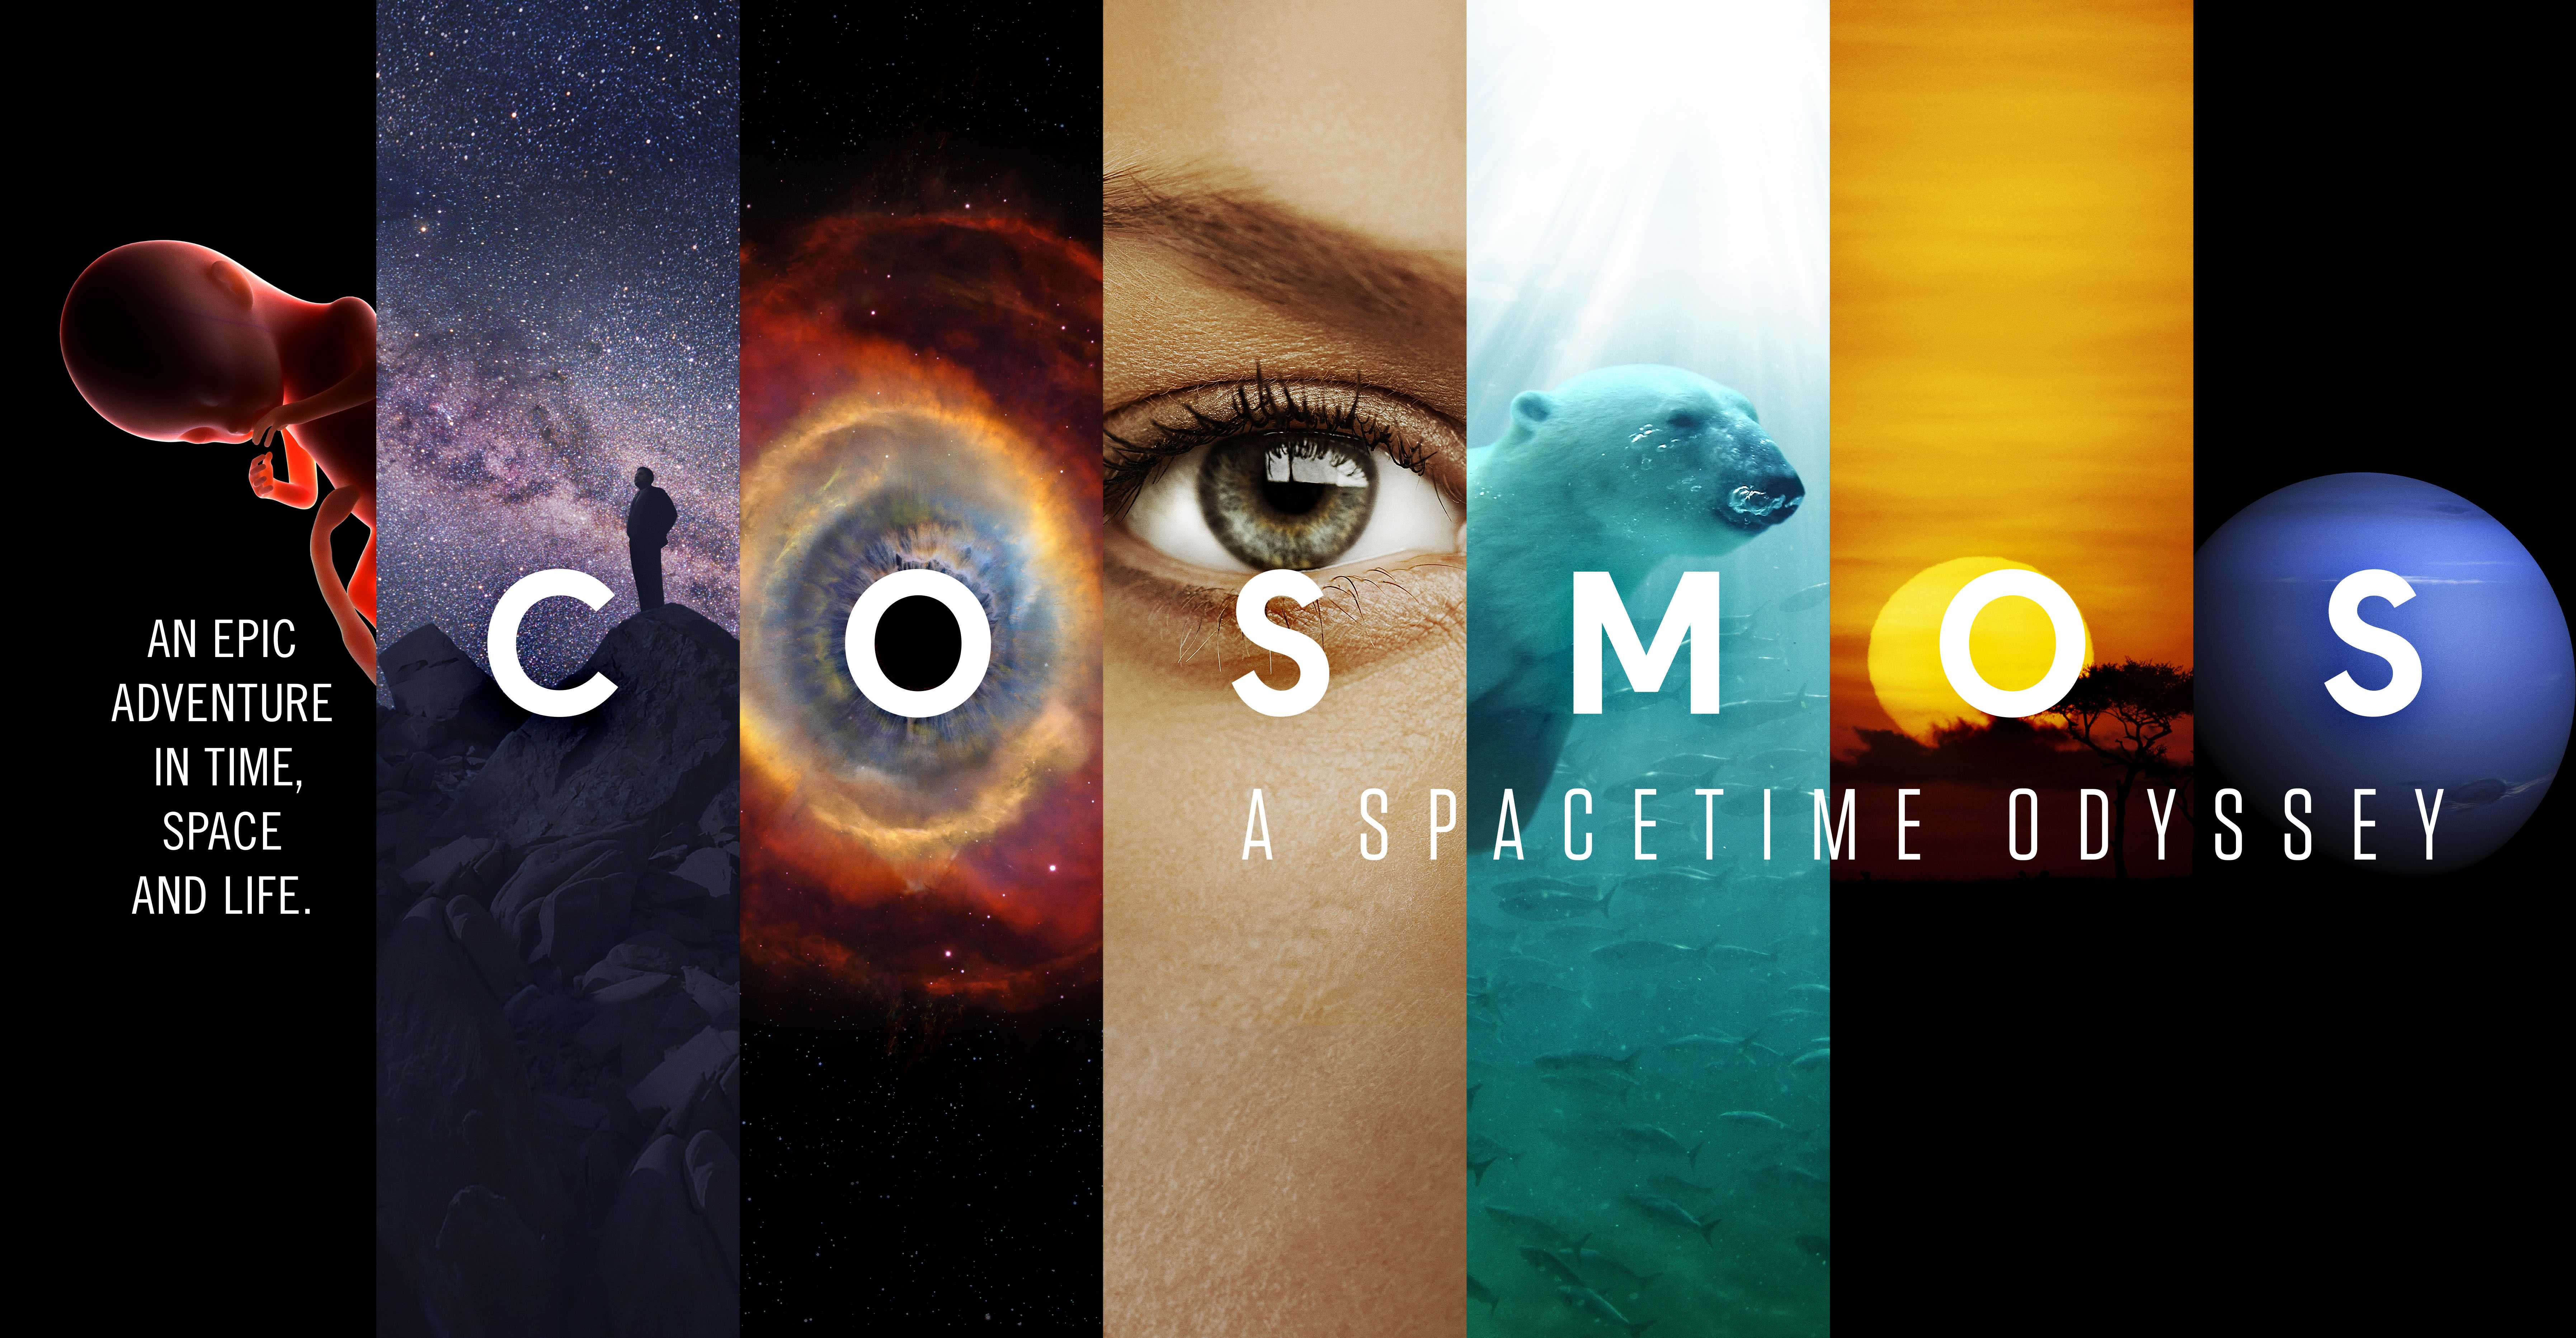 “Cosmos A Spacetime Odyssey” is well worth the time The Skyline View